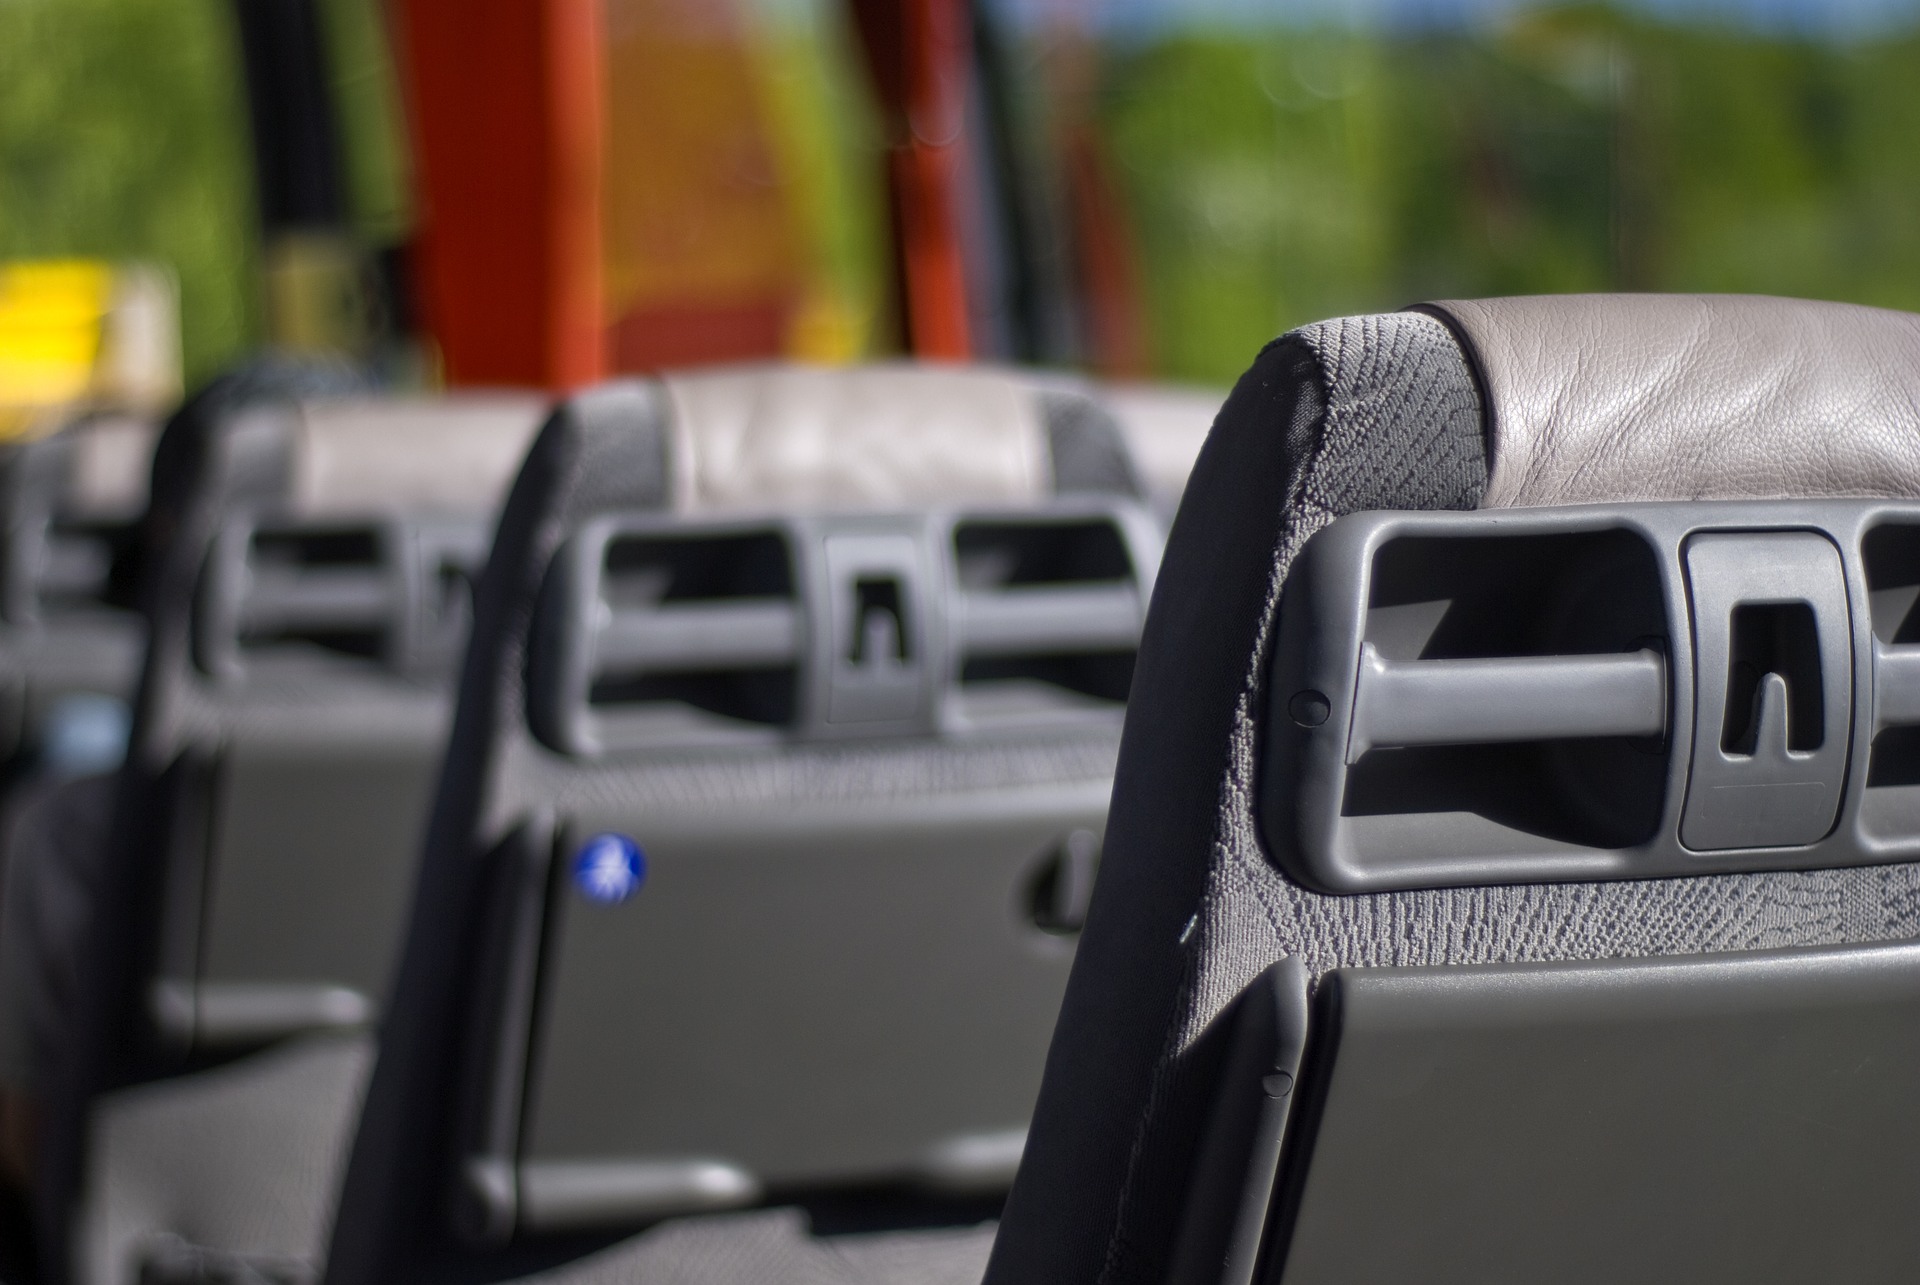 A photo of seats on a bus